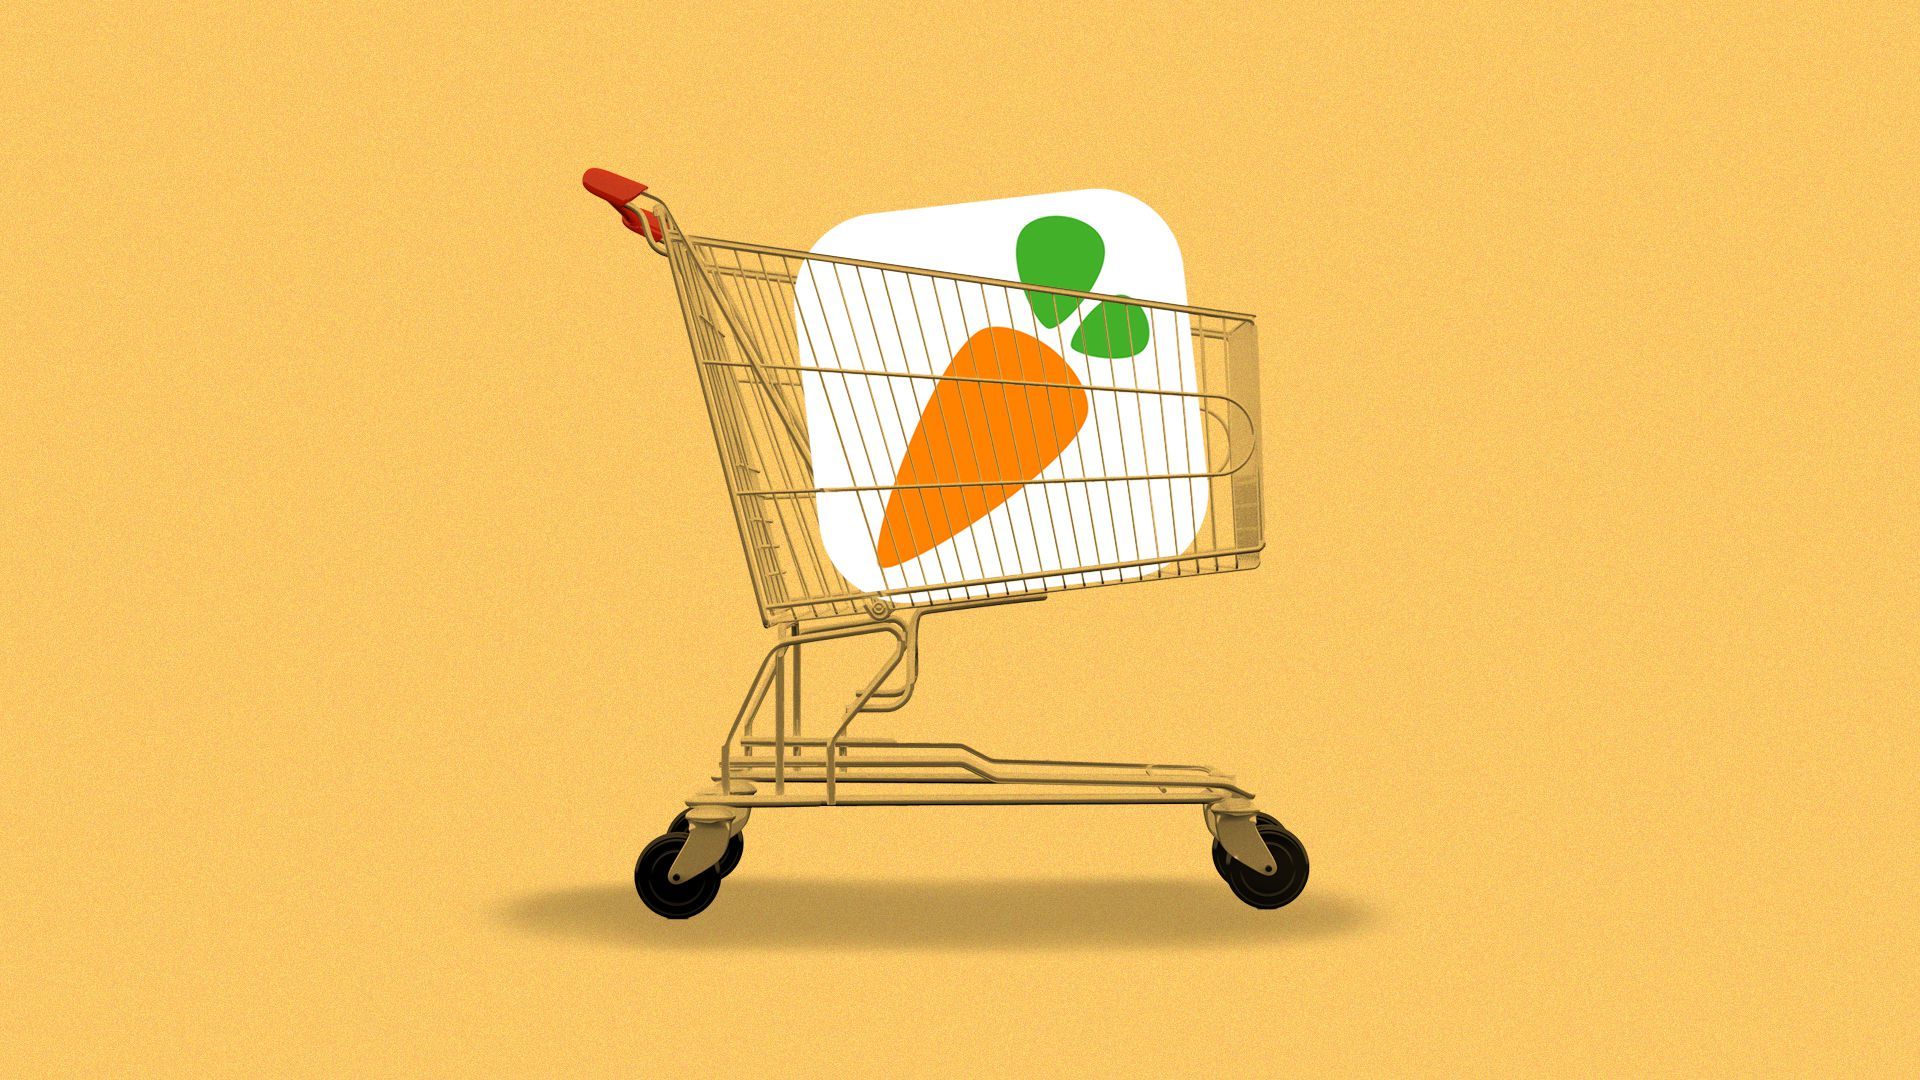 Illustration of a grocery cart with the Instacart app icon inside.